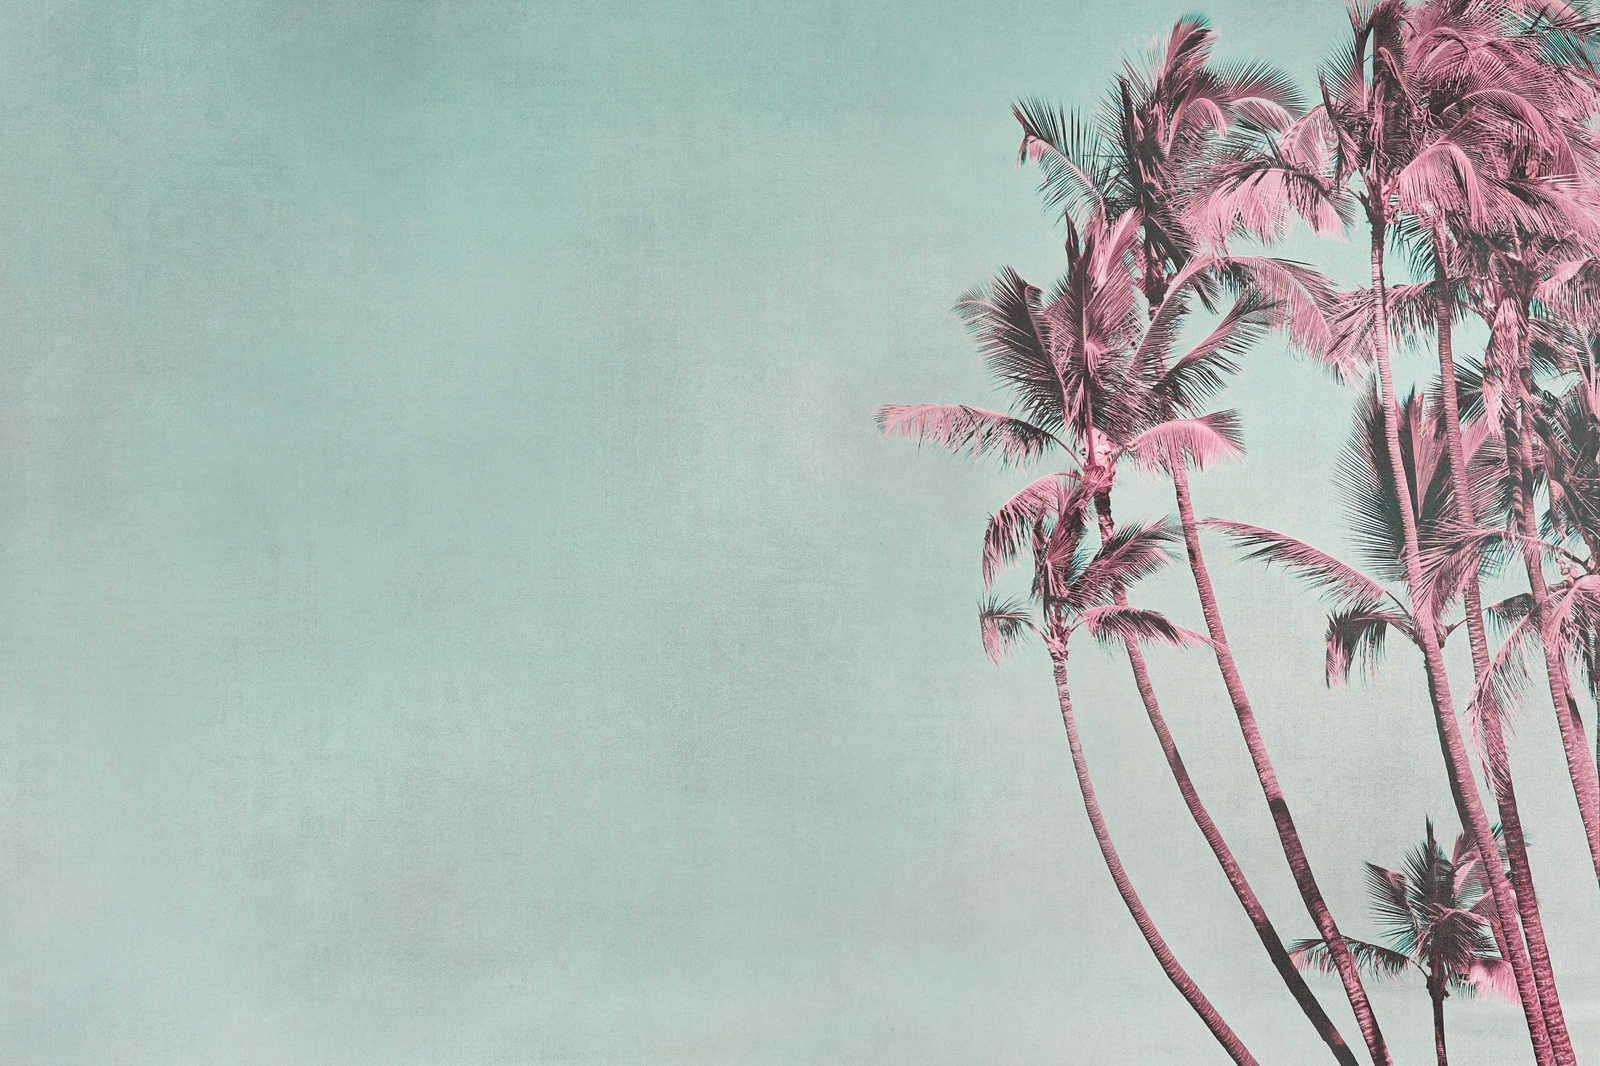             Palm Tree Canvas Painting Tropical Breeze in Turquoise & Pink - 0.90 m x 0.60 m
        